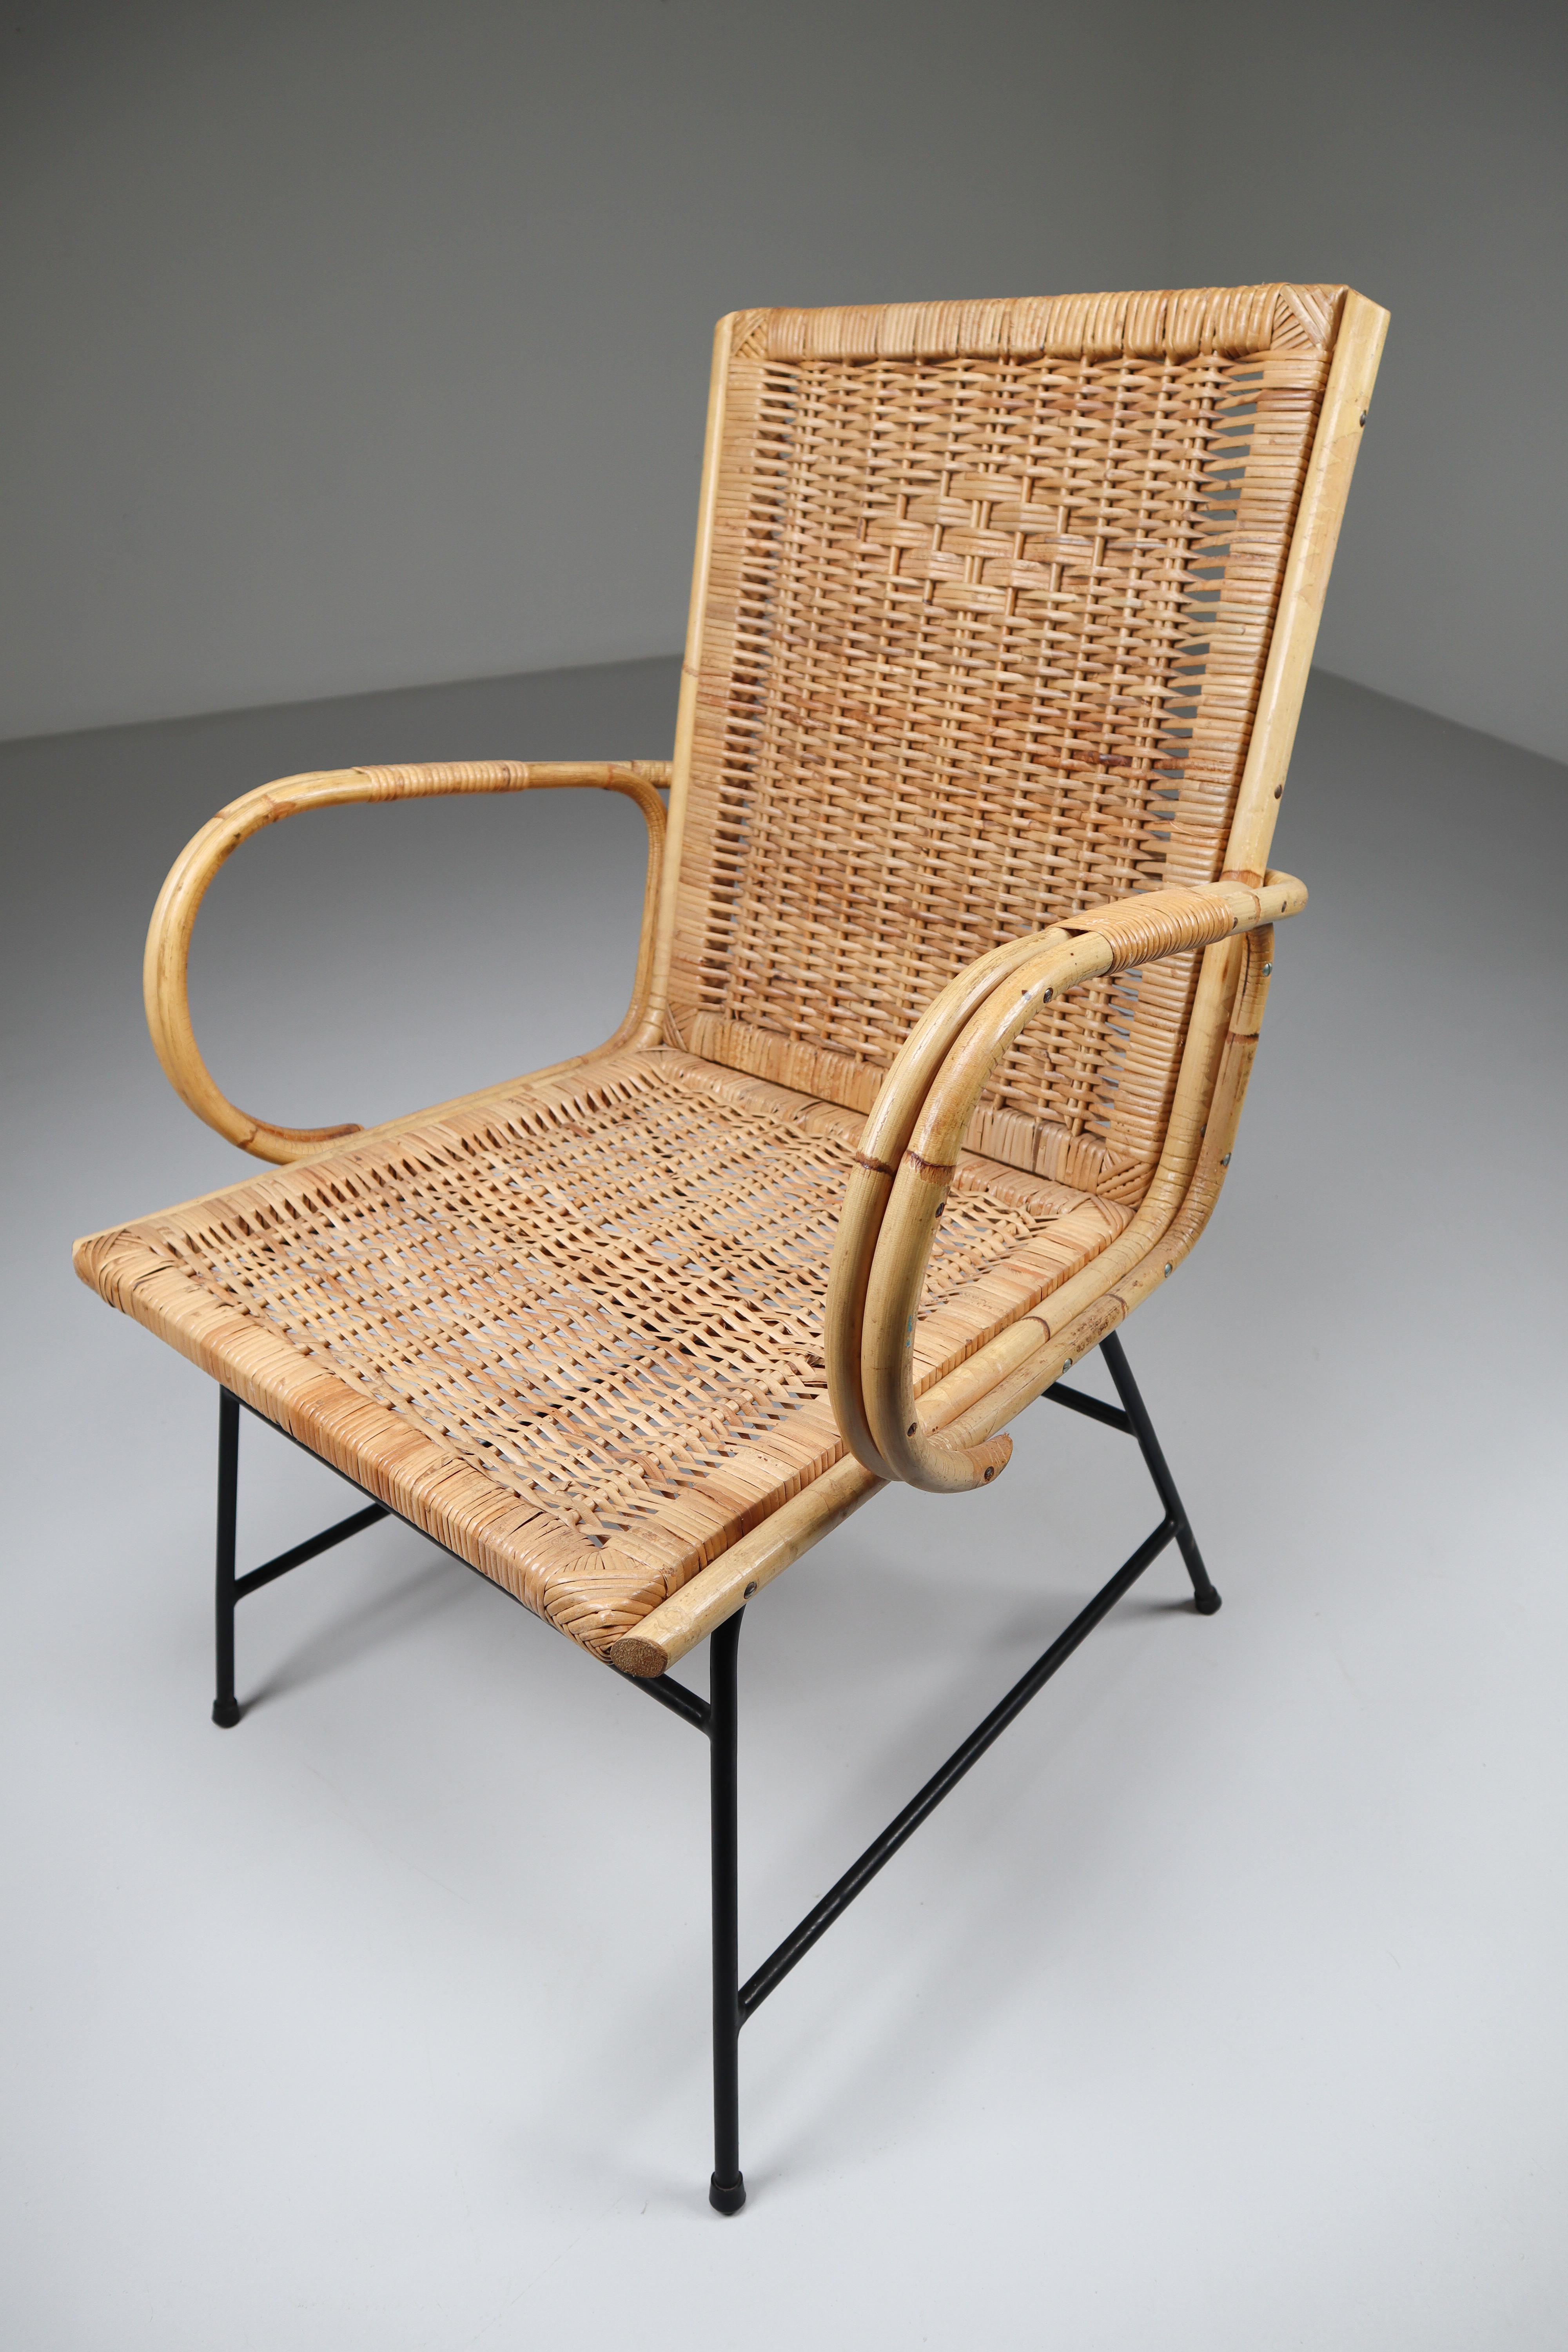 Wicker midcentury armchair designed and produced in France during the 1960s. The chair is made from handwoven wicker for the seat and he frame is made of black lacquered steel. They are comfortable to sit in and create an inviting sitting